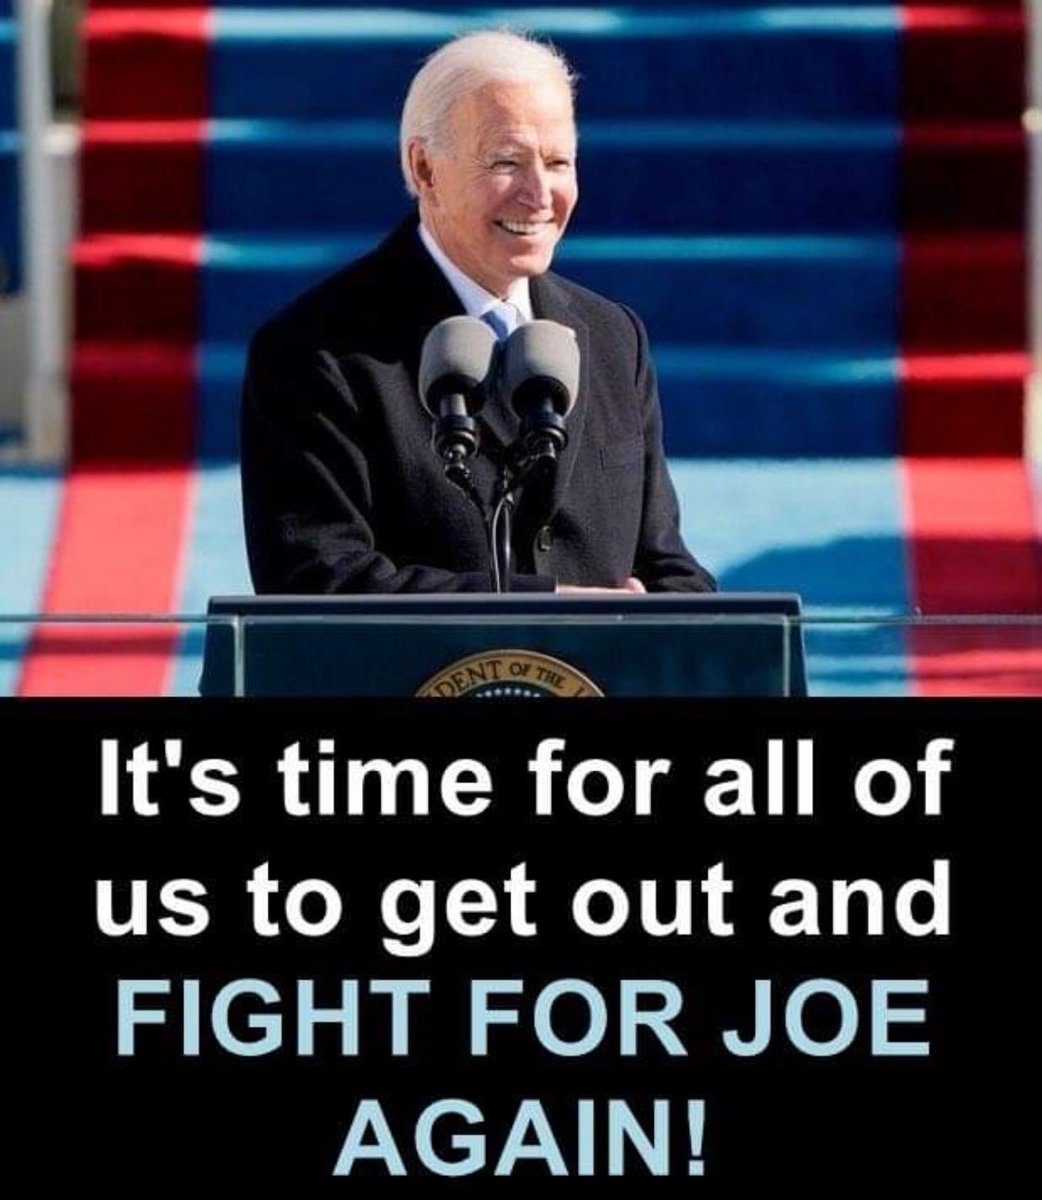 It’s absolutely clear that President Biden is leading Americans in the right direction.

He was handed a raging pandemic & The Economy was in shambles. We recovered. 

Our Allies are Stronger than ever. We have the best Economy in the world 🌎. 
#ProudBlue 
#VoteBidenHarris2024